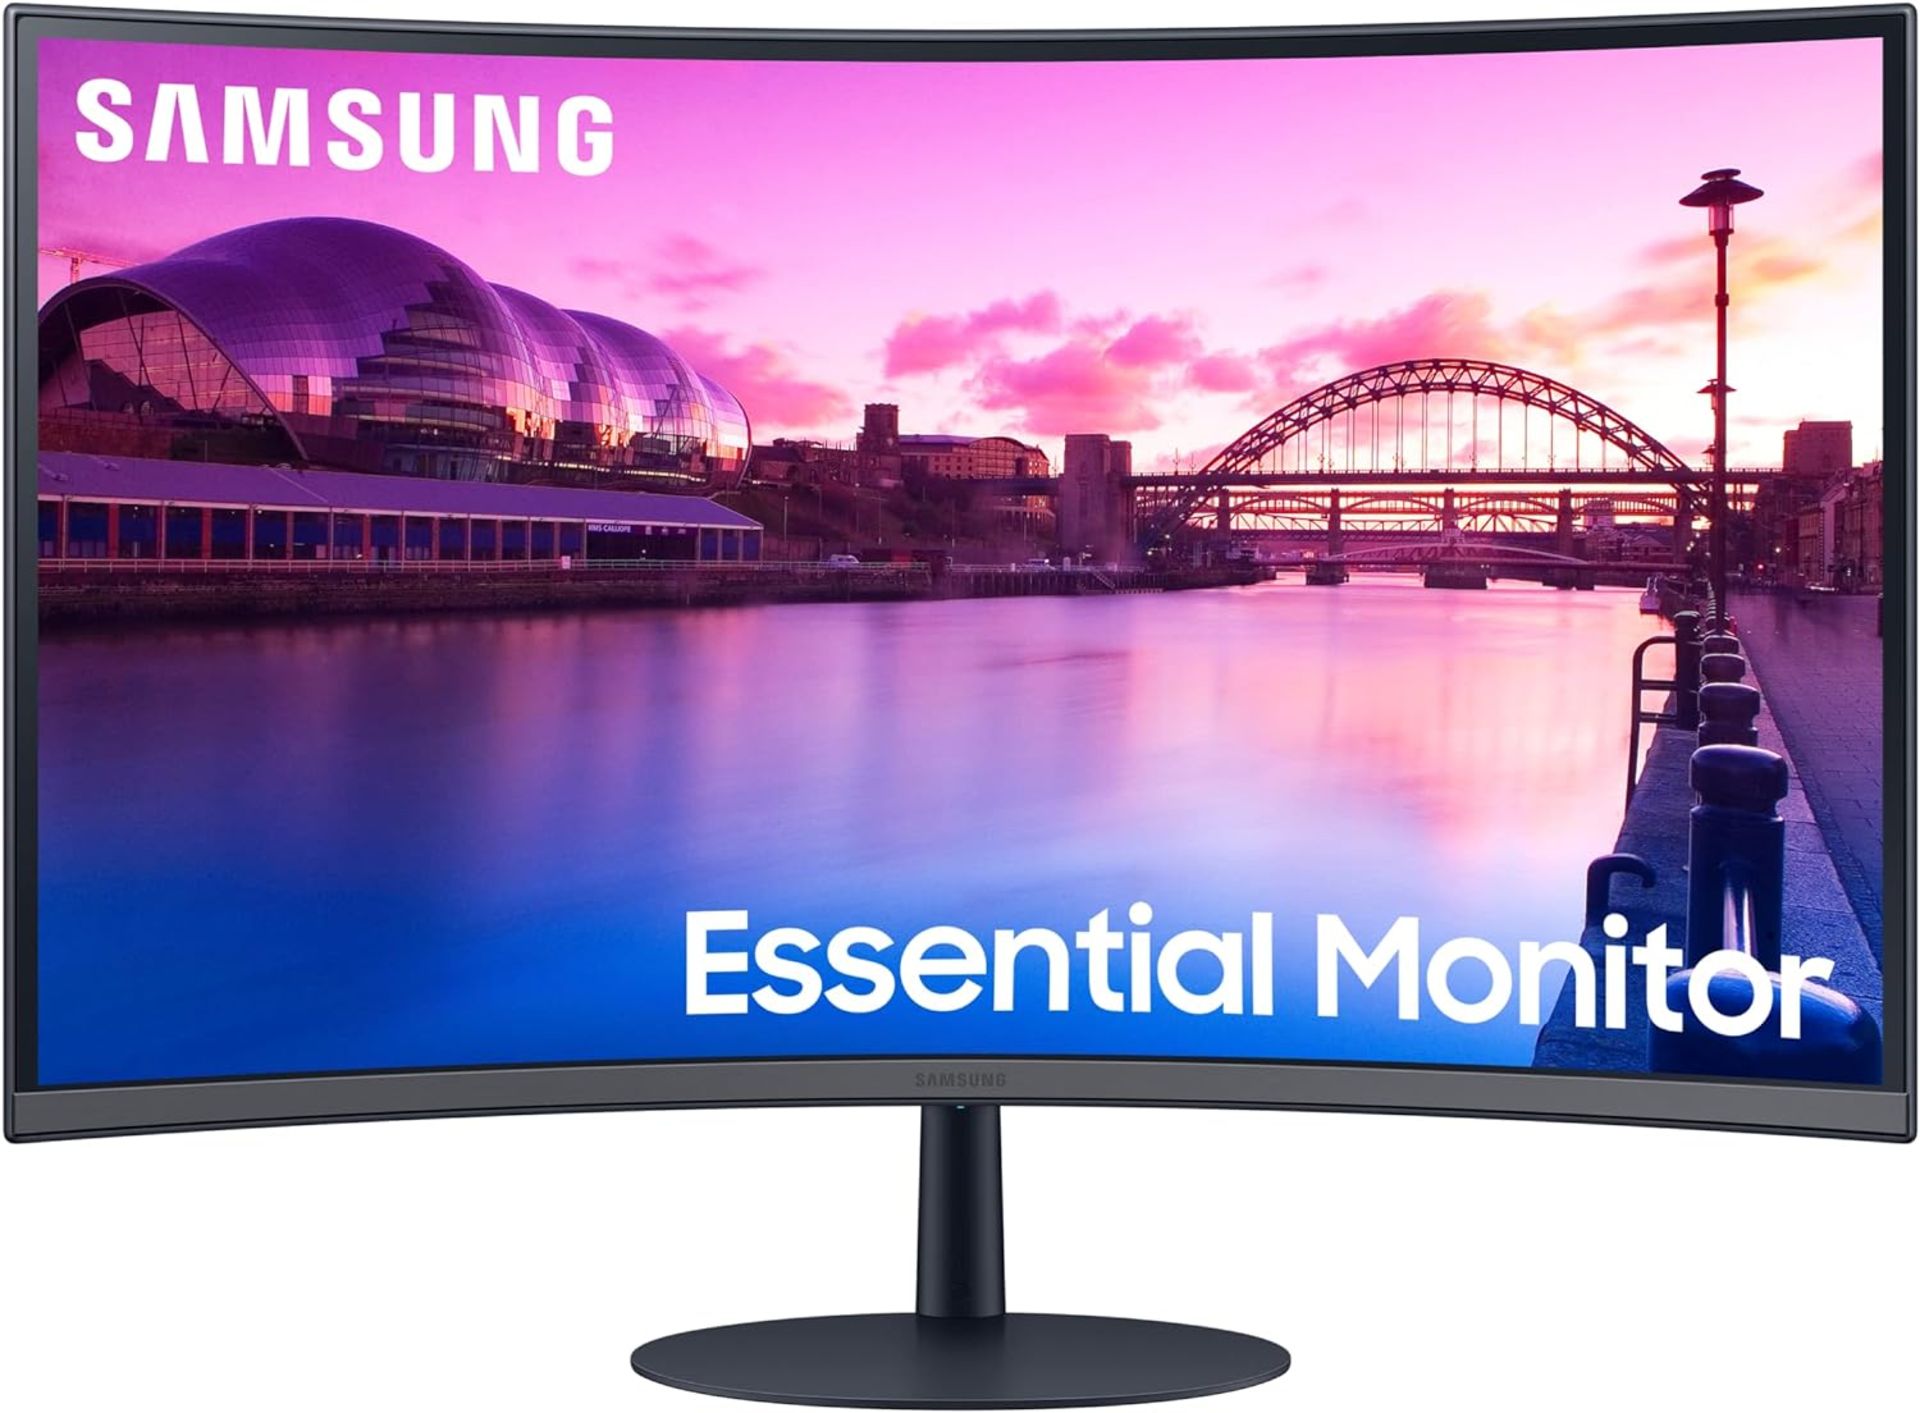 NEW & BOXED SAMSUNG S27C390EAU 27 Inch 75Hz Curved FHD Monitor. RRP £199. (R15). 27in LED display.